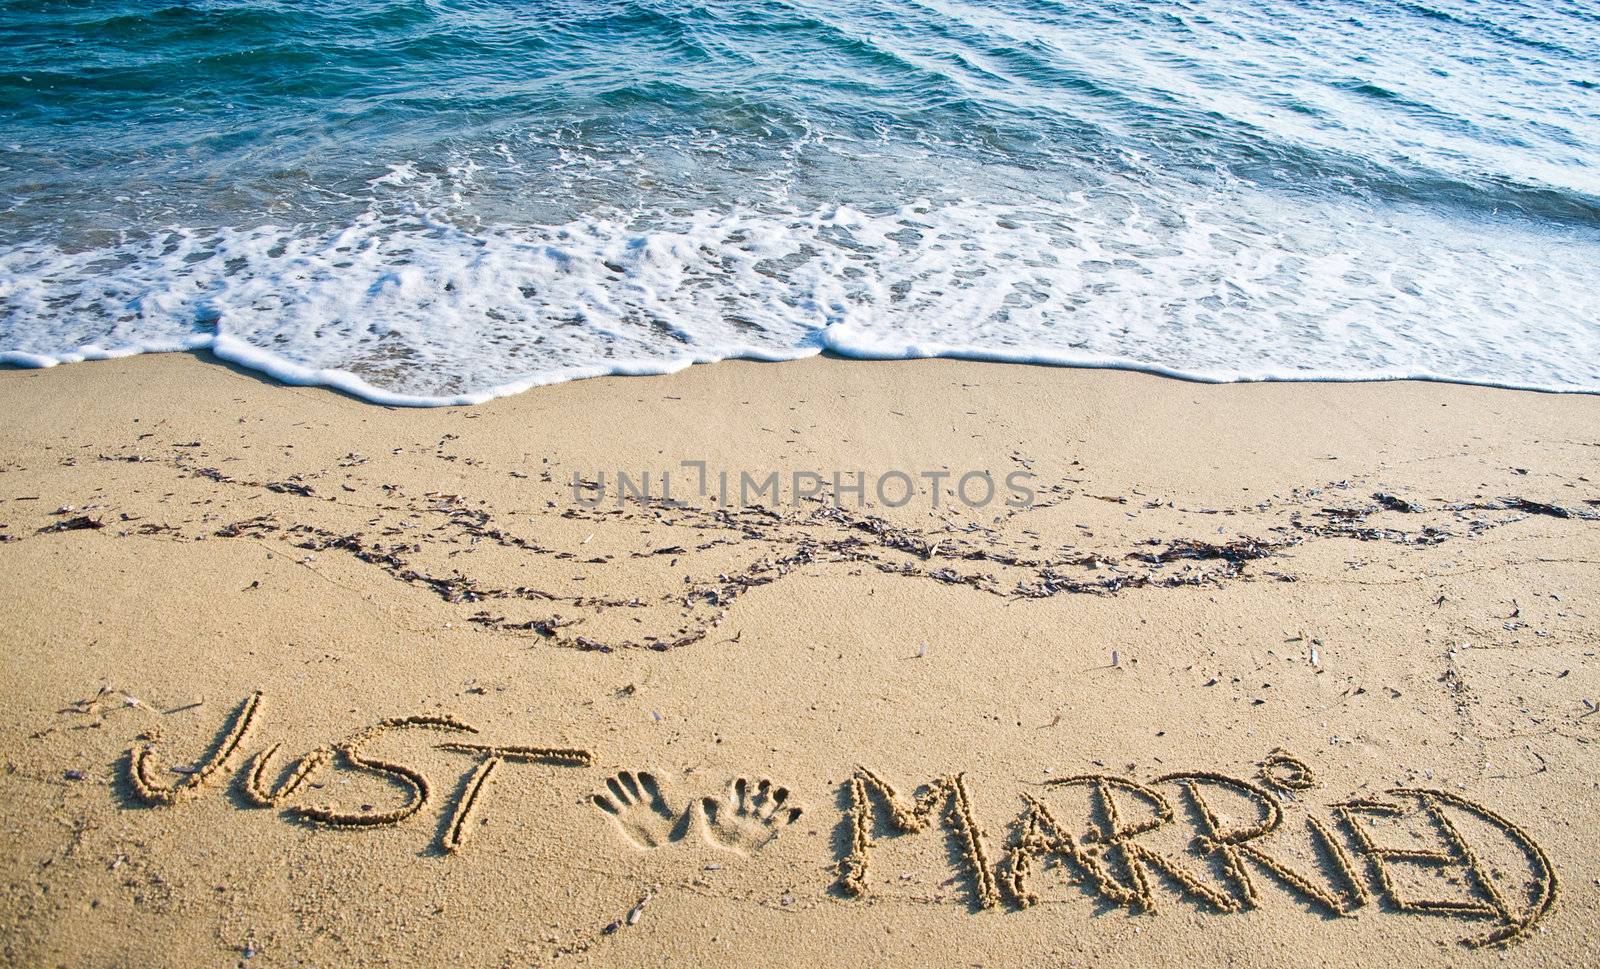 Just Married written in the Sand on the Beach